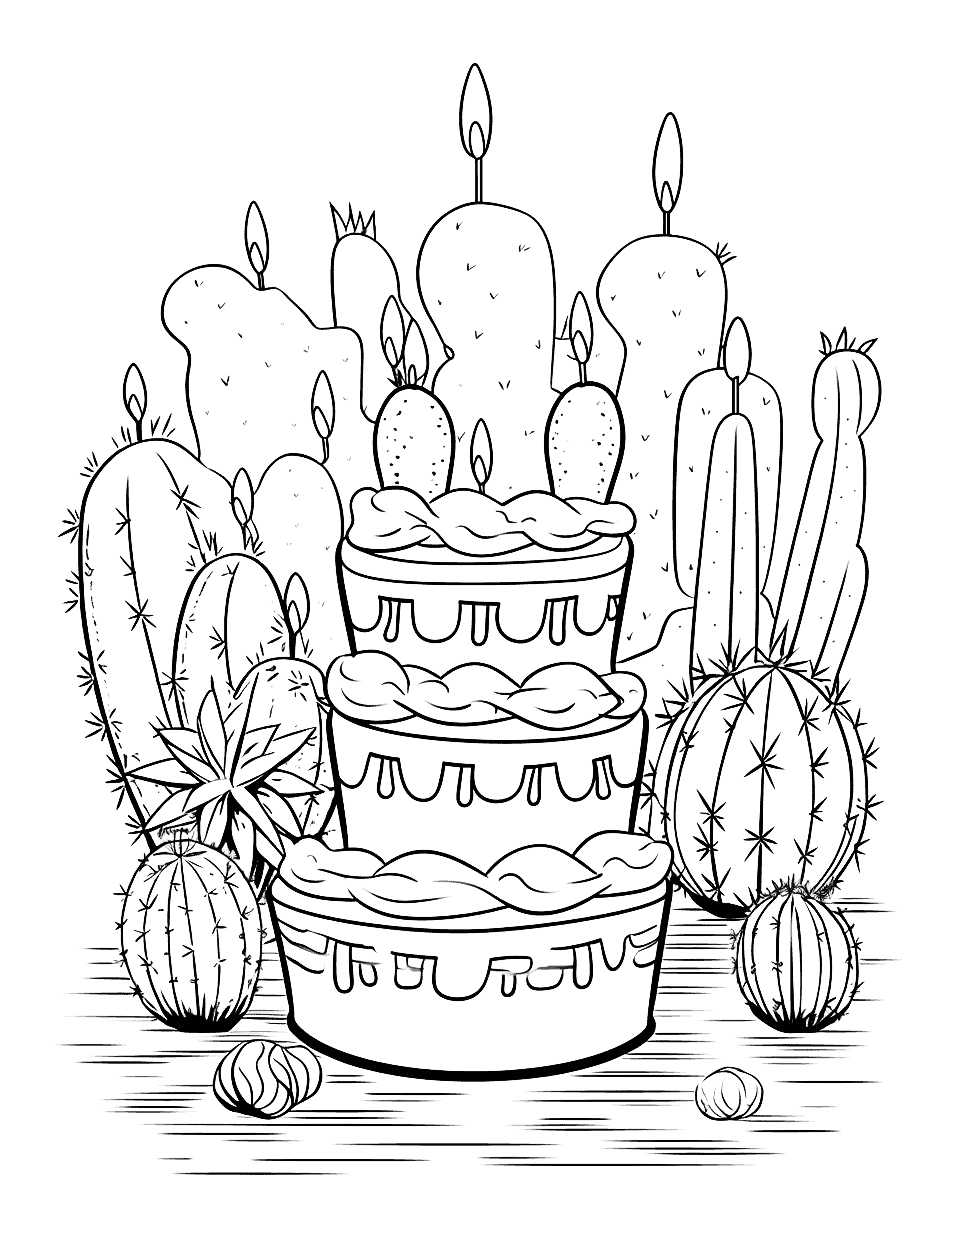 Desert Cactus Birthday Happy Coloring Page - A group of cute cacti celebrating a birthday party in the desert.